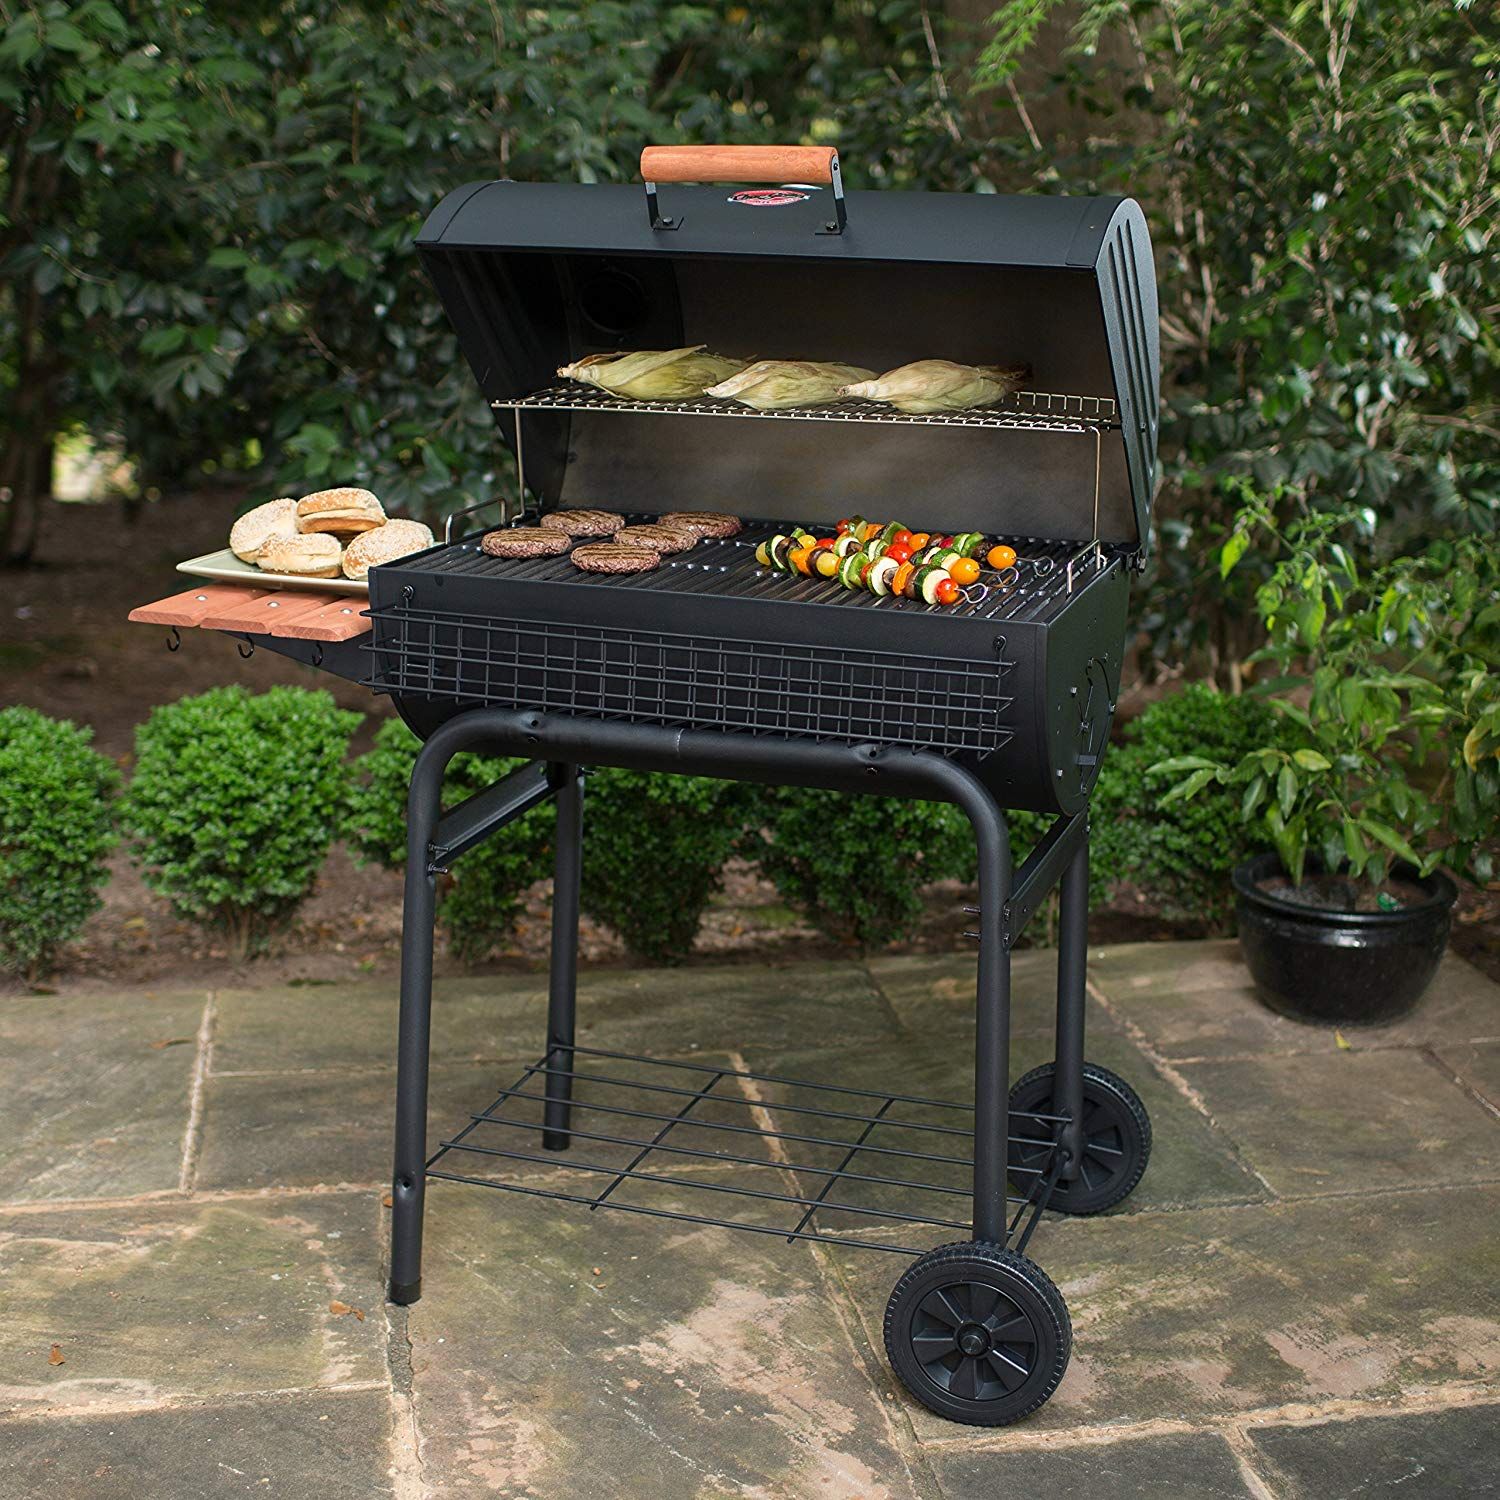 Outside Electric Grill - Buy Electric, Charcoal and Propane Grills At Best Prices